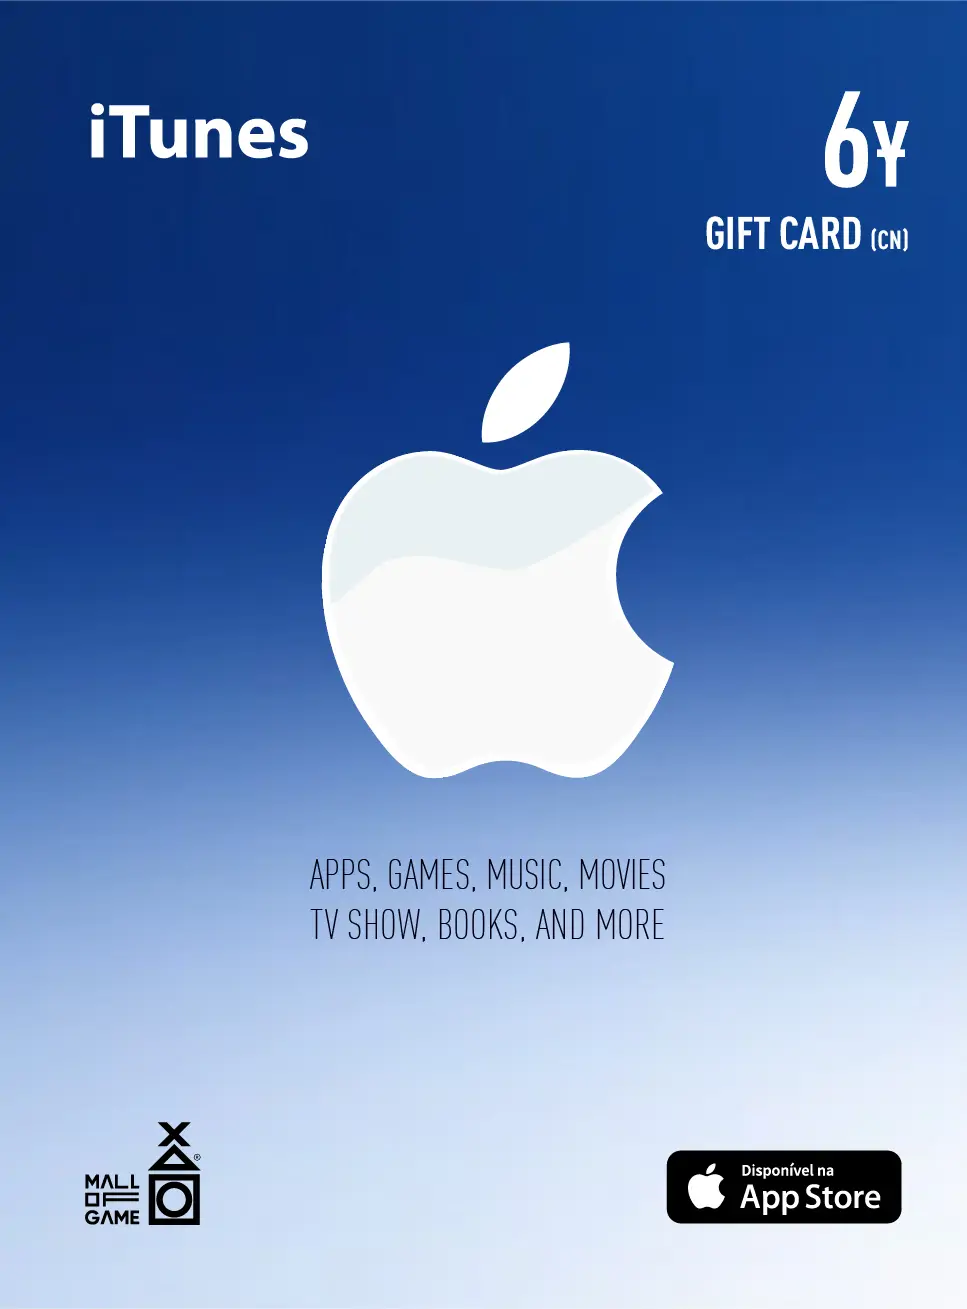 iTunes CNY6 Gift Card (CN)